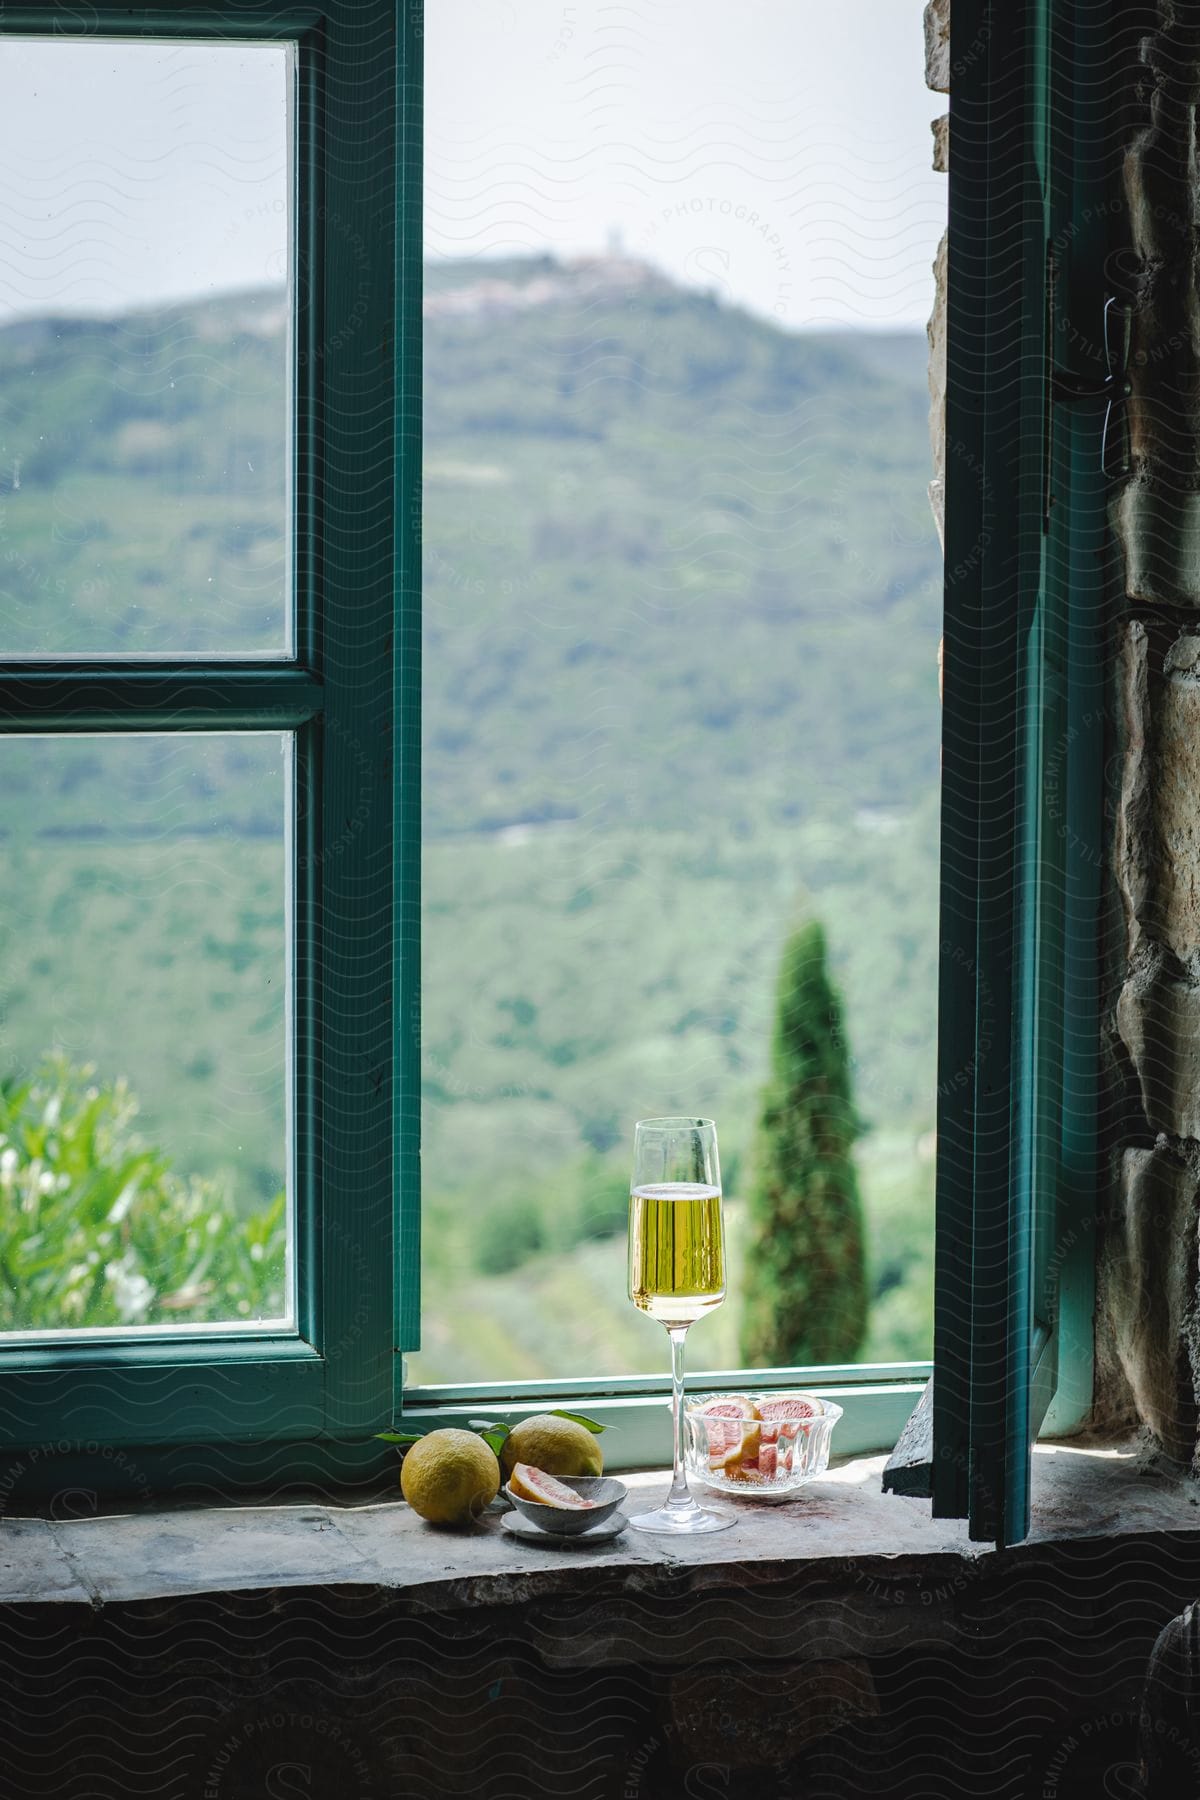 Stock photo of a glass of drink on a windowsill with a mountain on the horizon